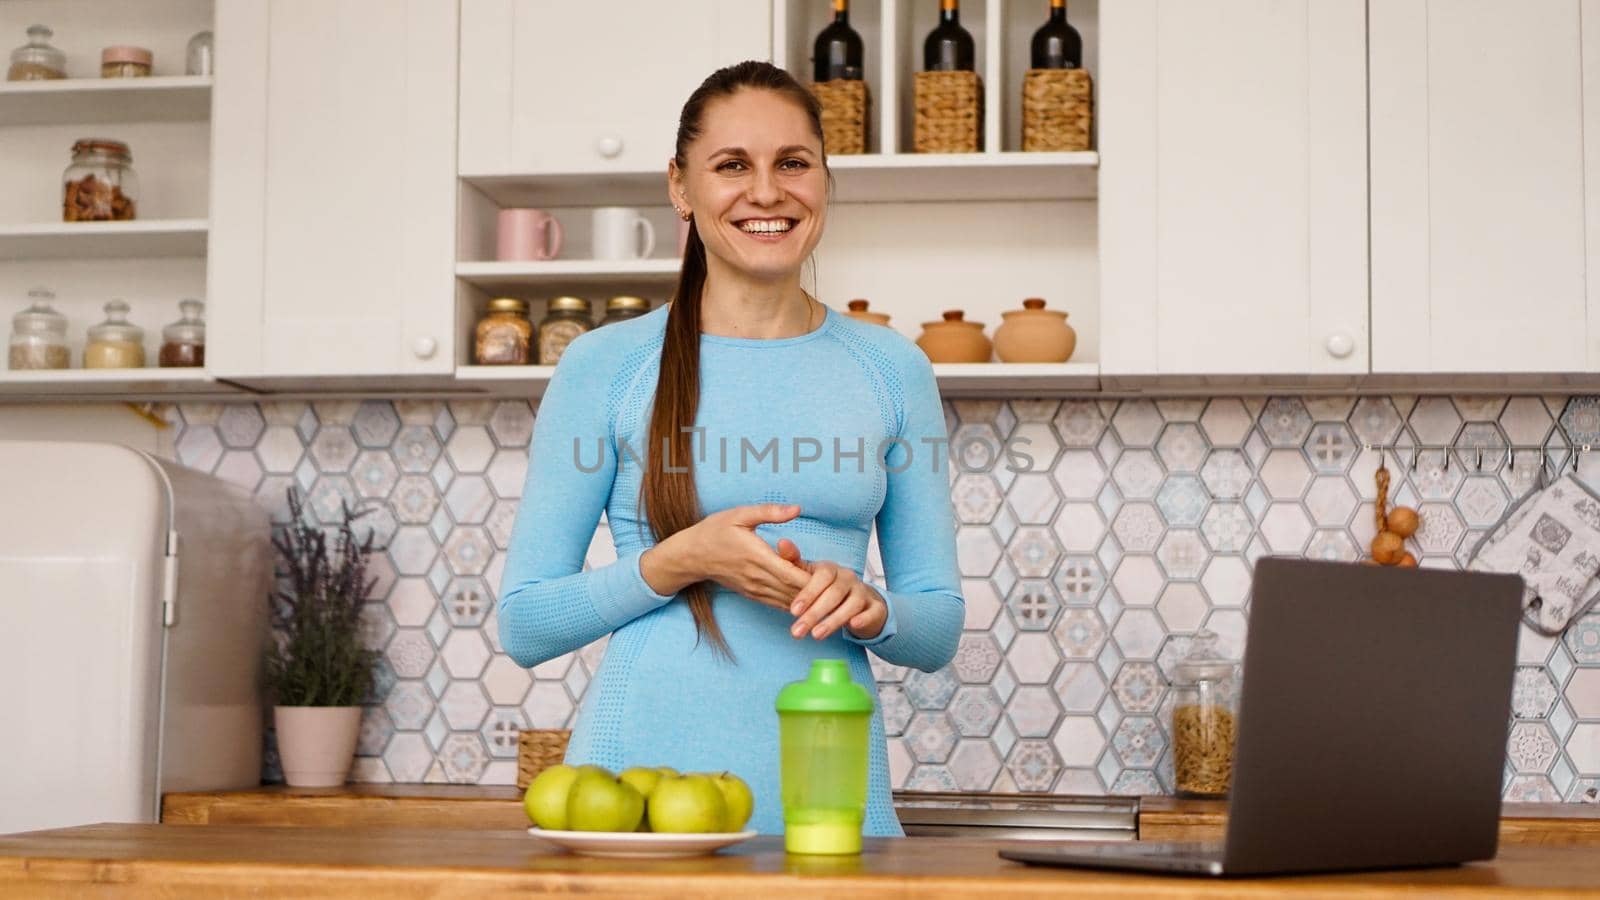 Smiling woman using computer in modern kitchen. Healthy lifestyle concept by natali_brill